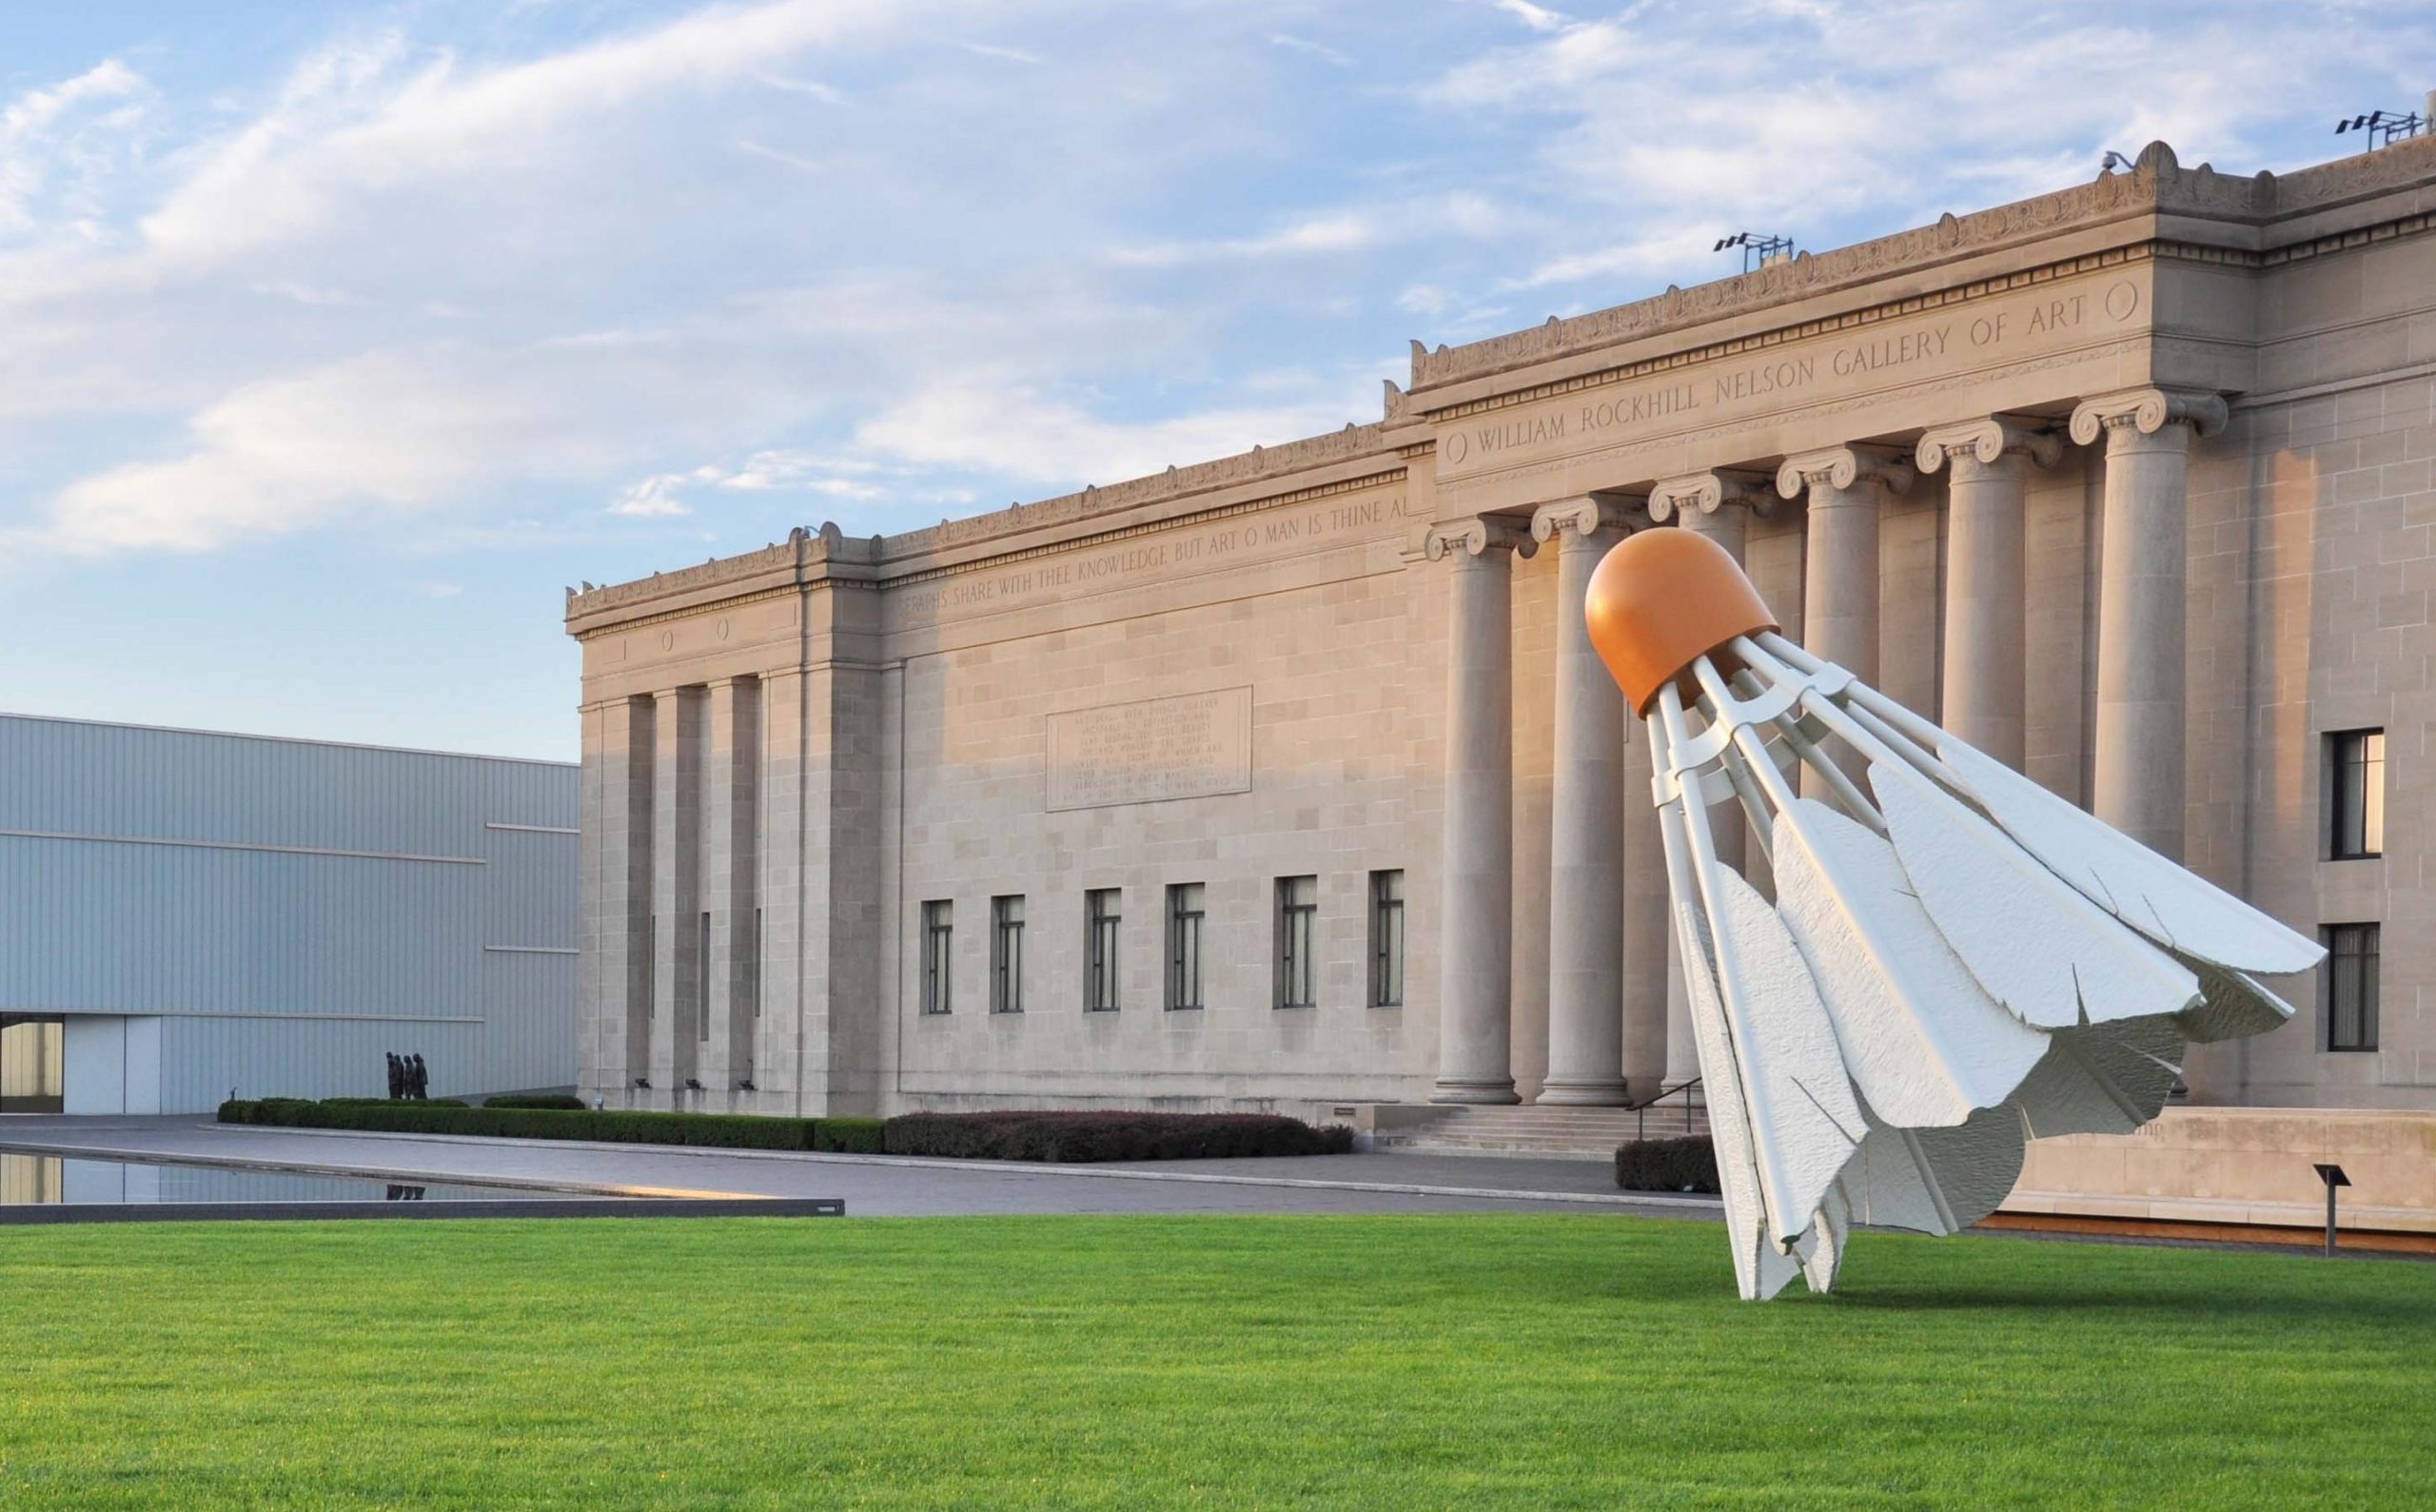 The Nelson-Atkins from the north with the Shuttlecock